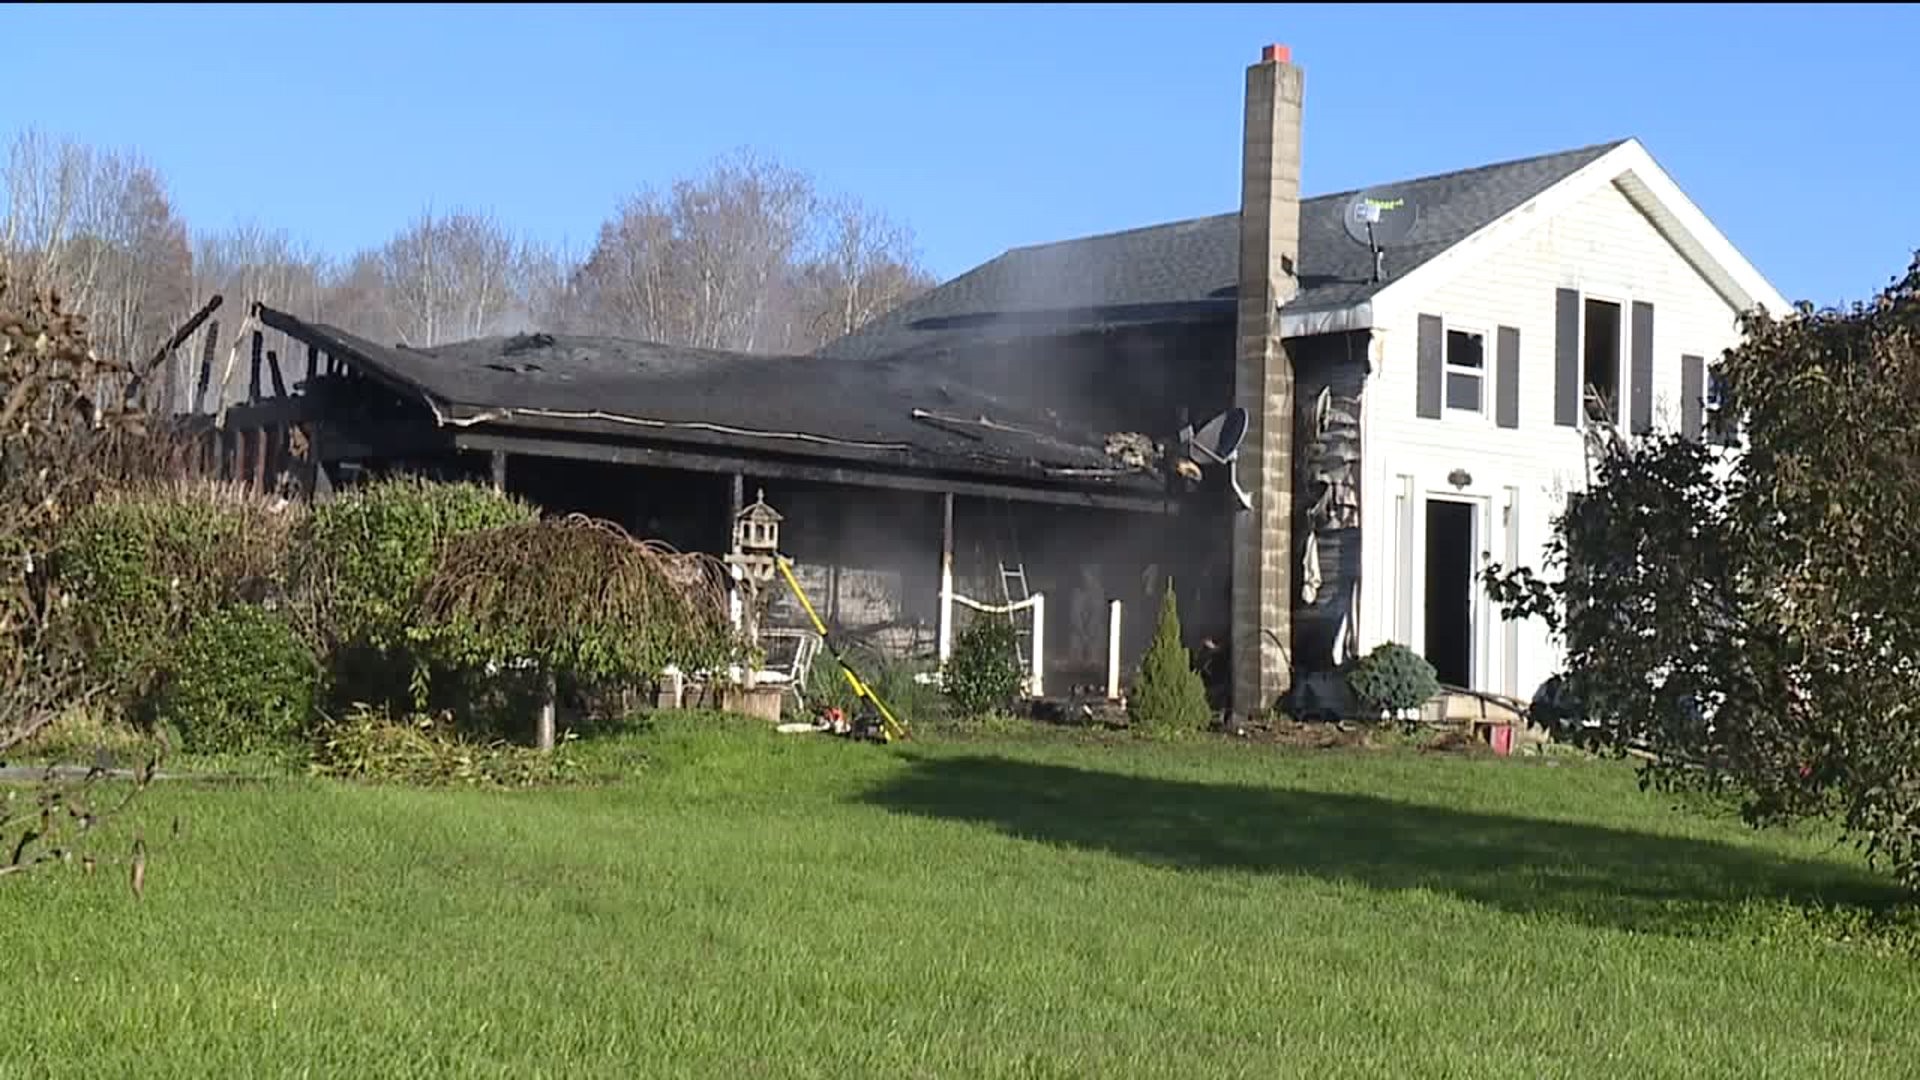 Bradford County Home Damaged by Fire